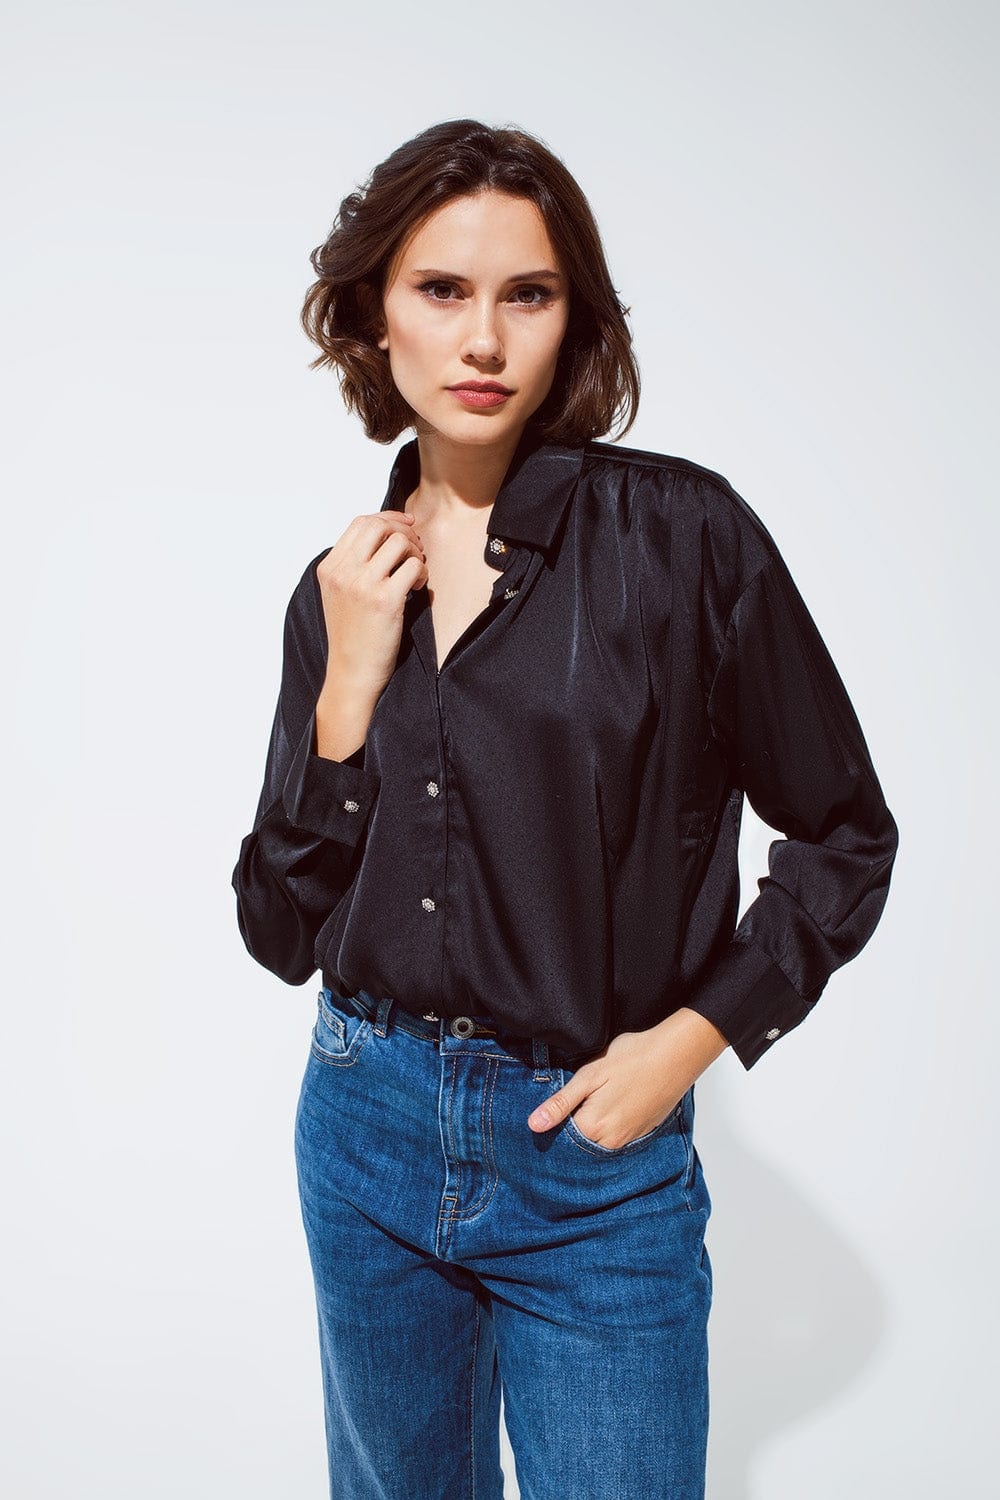 Q2 Women's Blouse One Size / Black Black Satin Blouse With Rhinestone Buttons